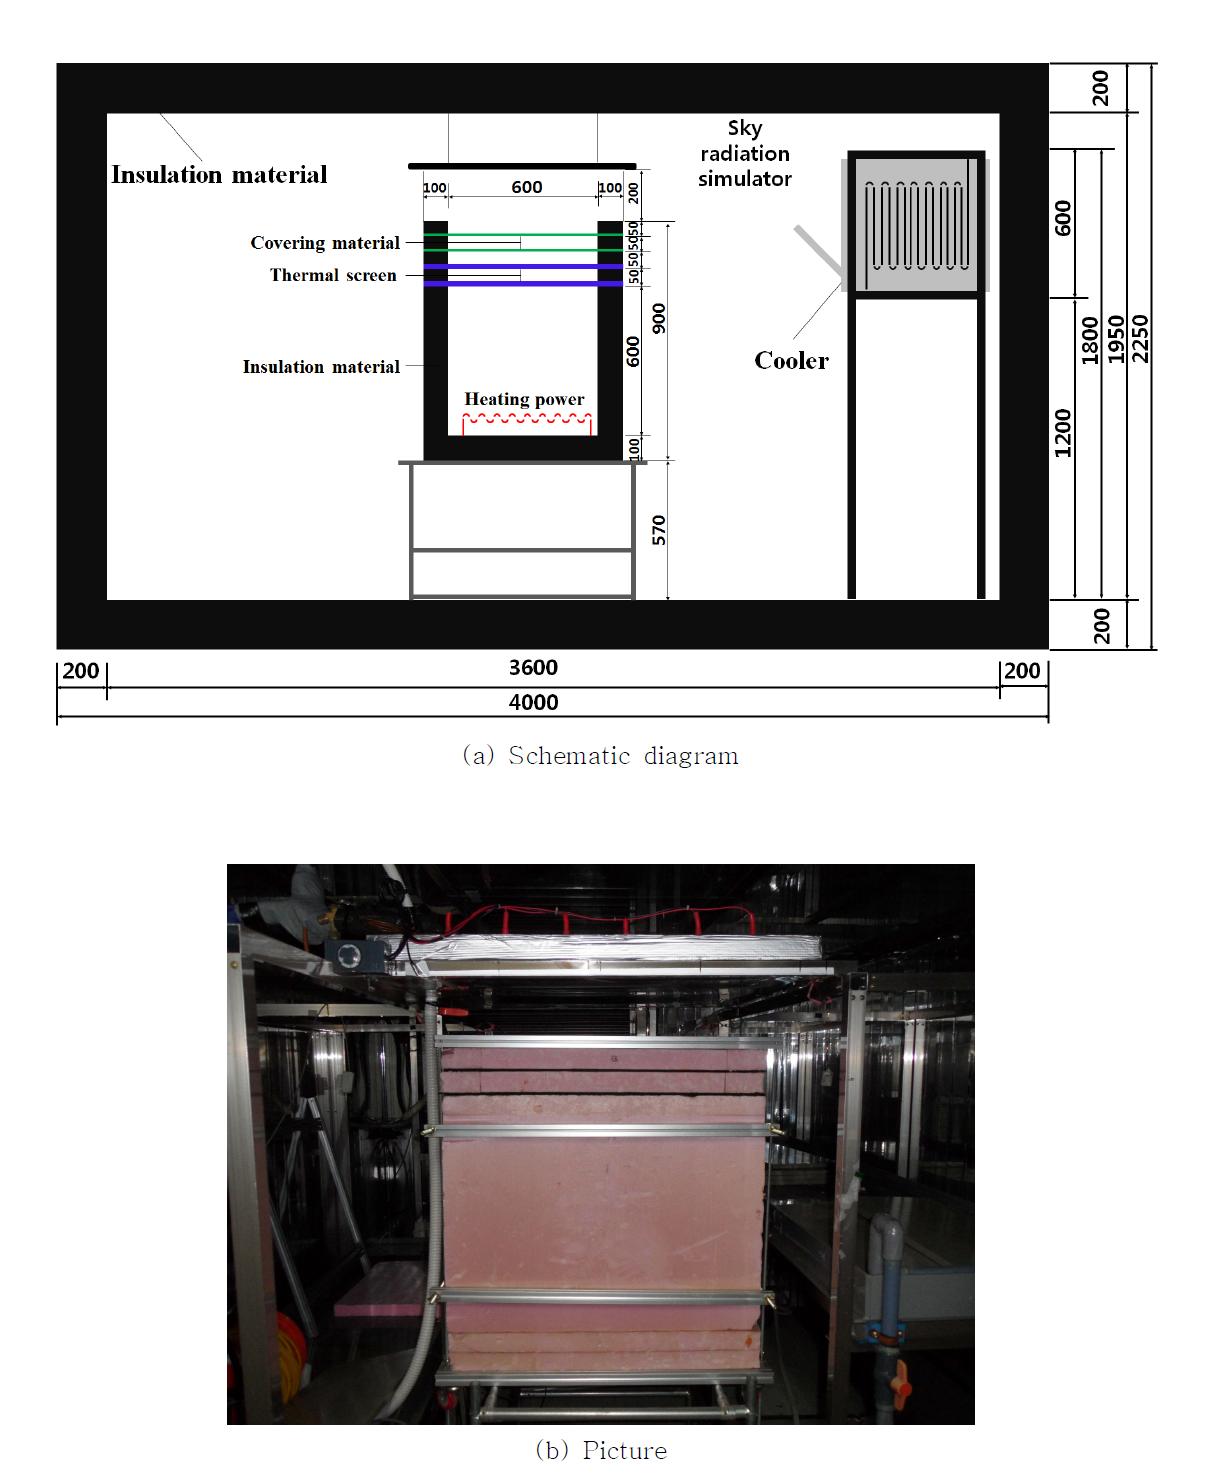 Schematic diagram and picture of the hot box in the cold chamber for the laboratory experiment (units: mm)